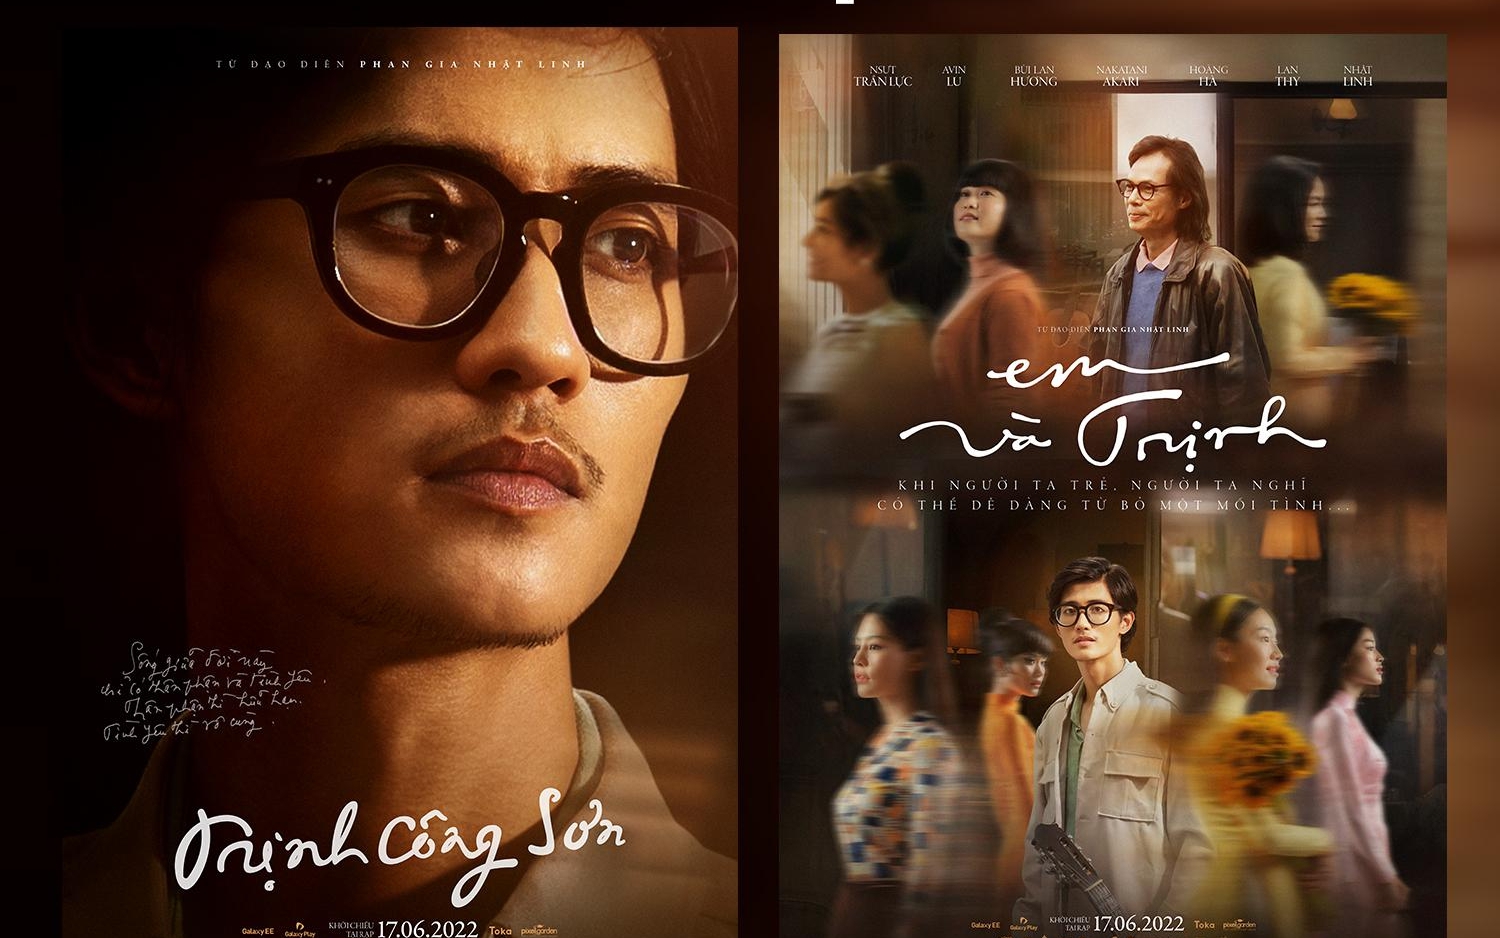 Why are there two films about Trinh Cong Son in theaters at the same time?